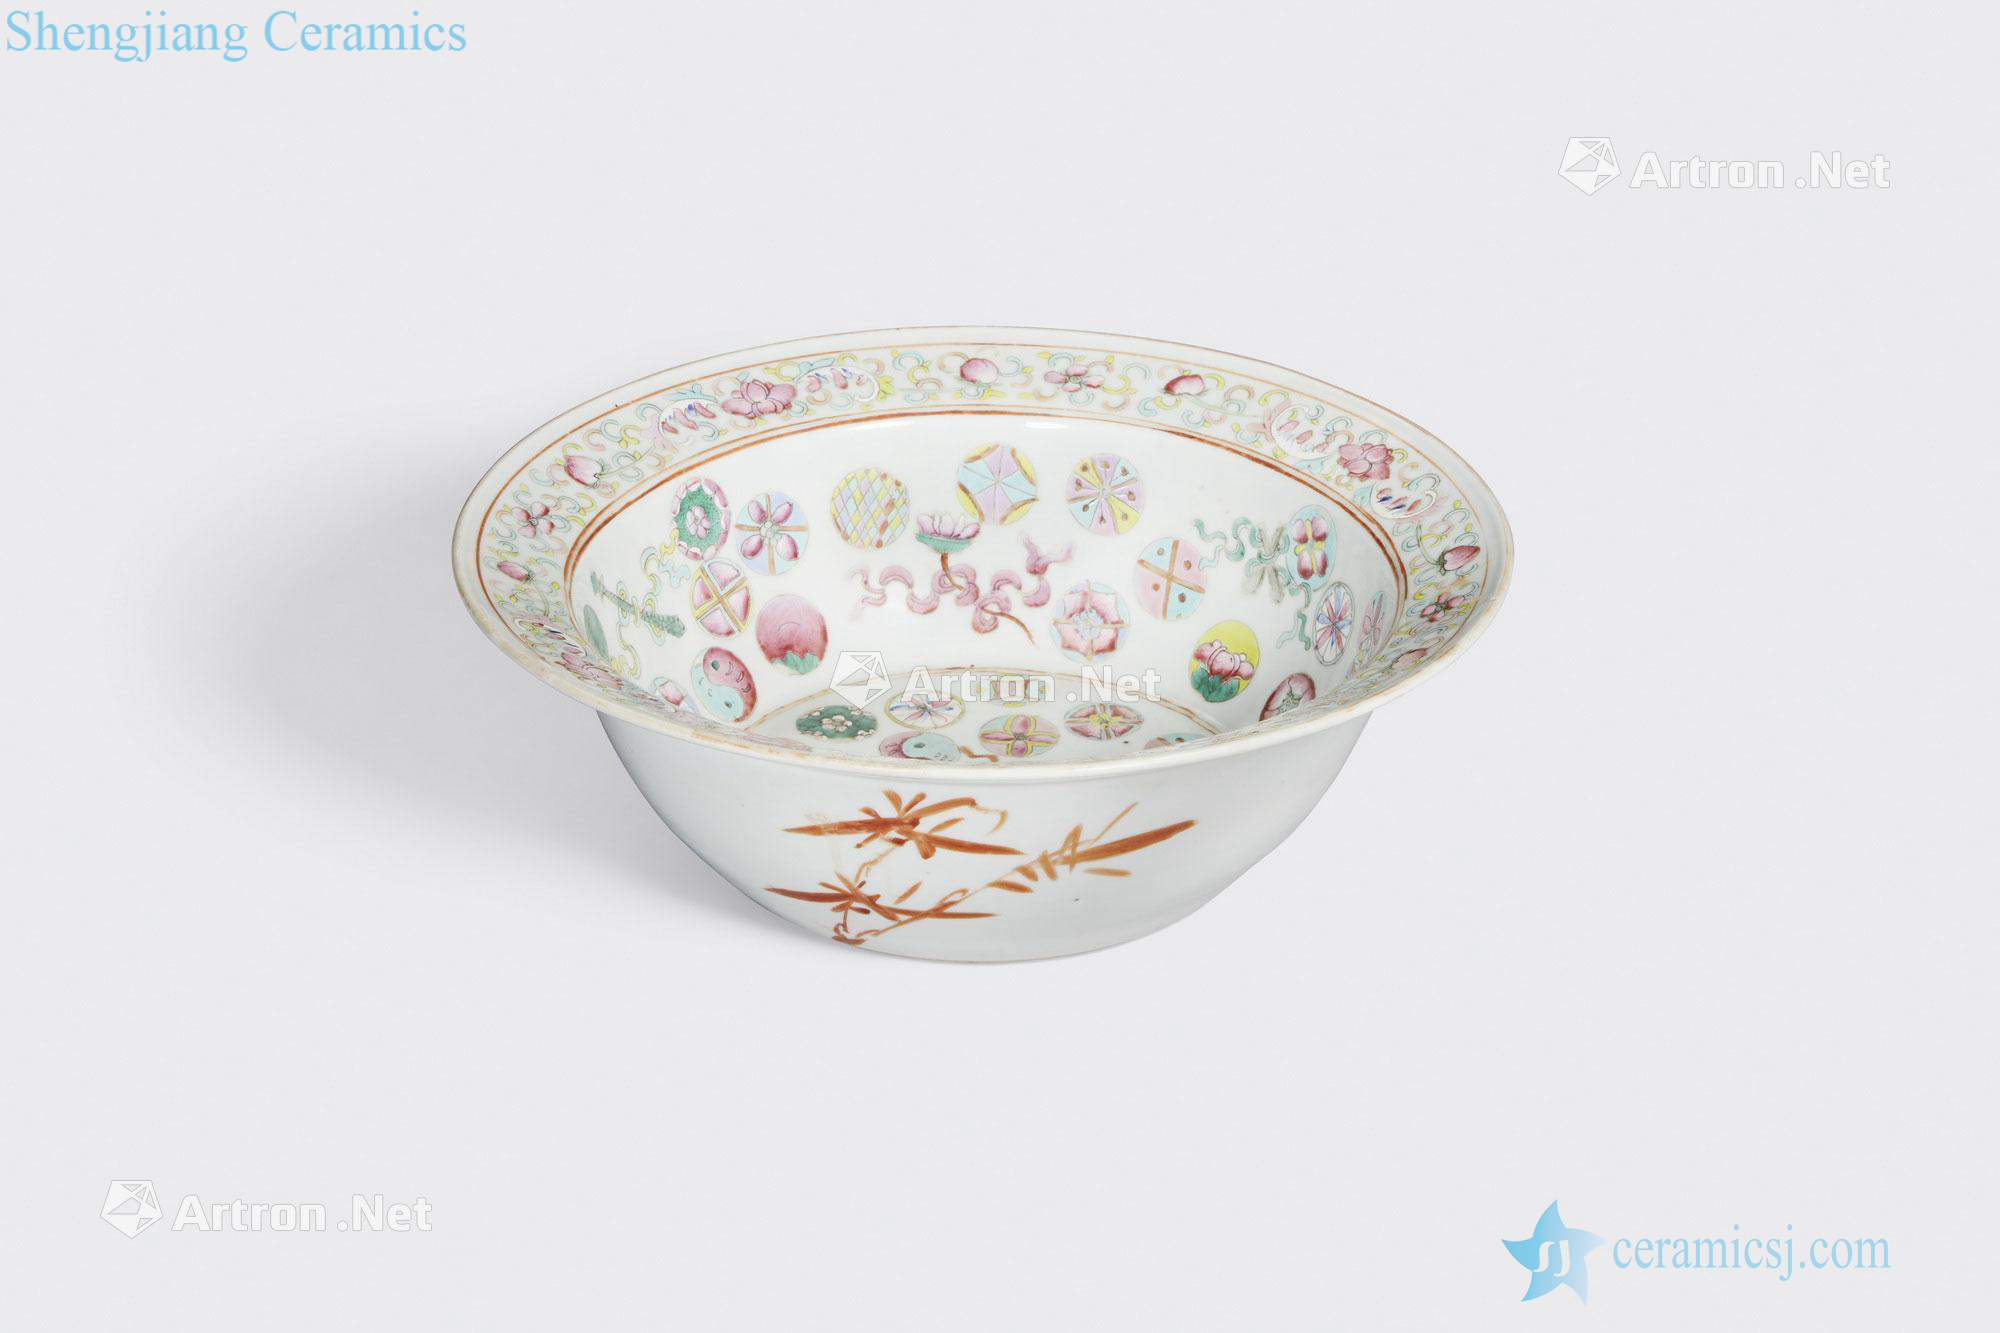 The newest the Qing/Republic period A FAMILLE ROSE ENAMELED BASIN WITH ROUNDEL DECORATIONS